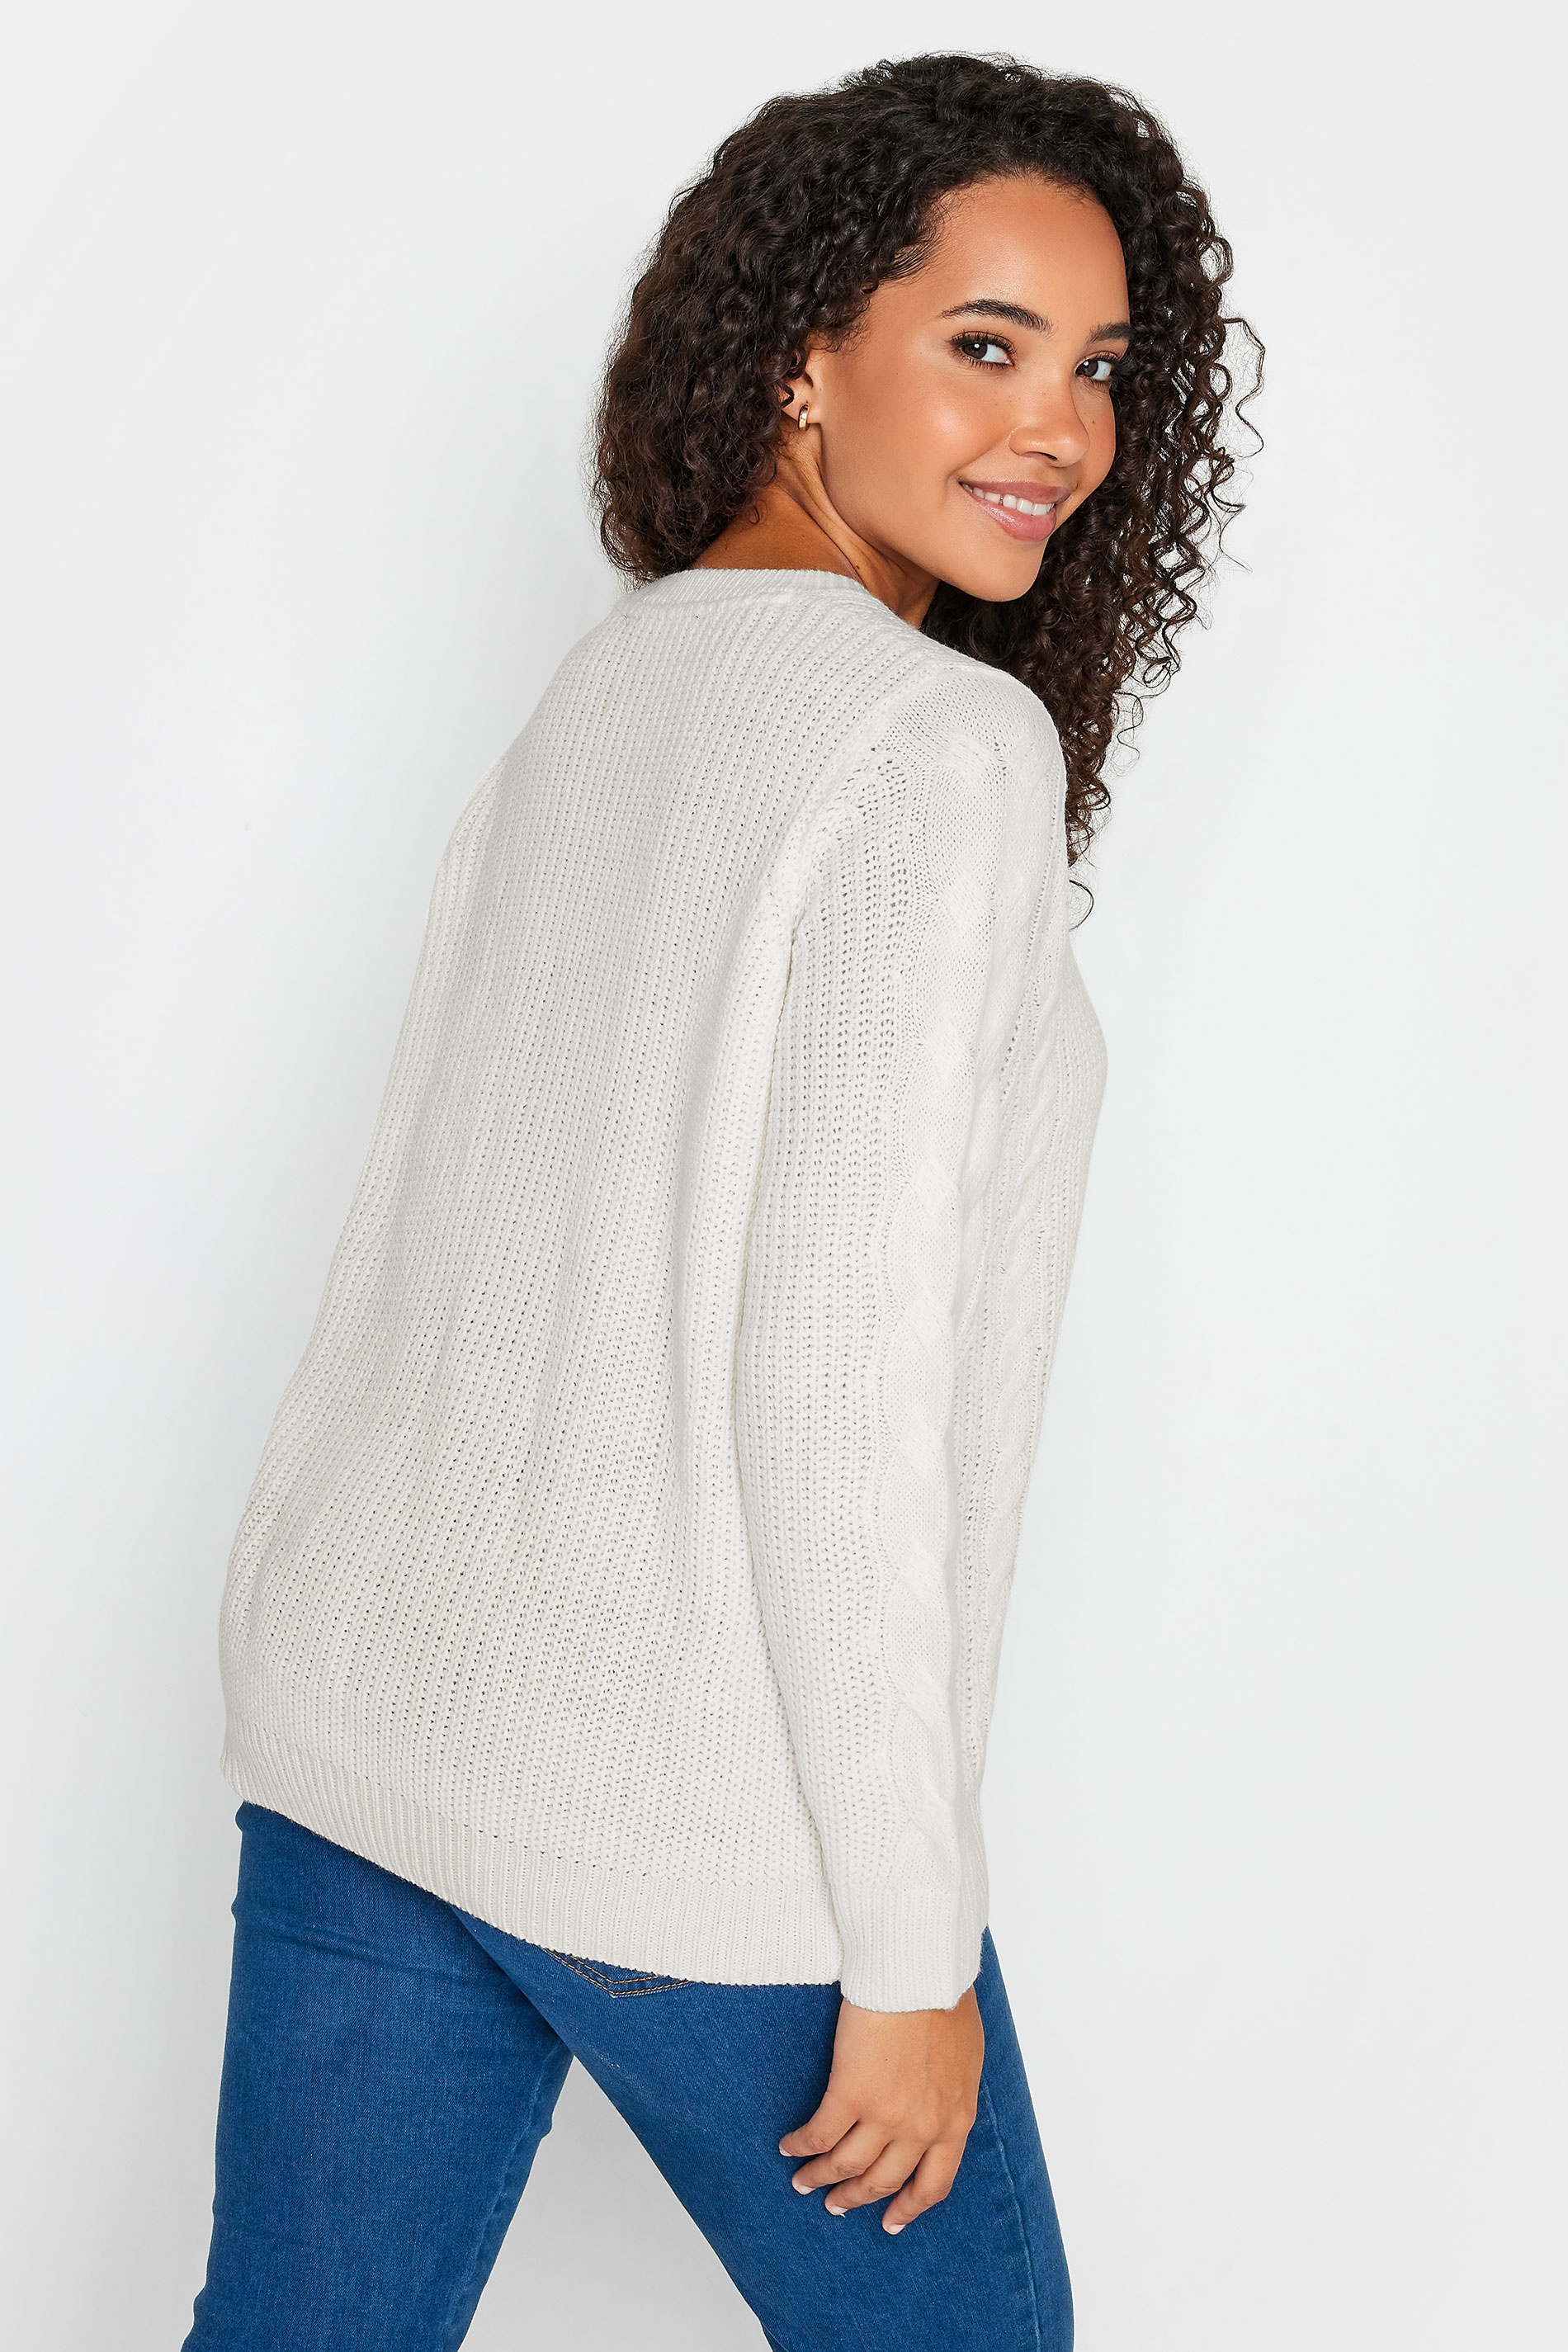 M&Co Ivory White Cable Knit Jumper | M&Co 3